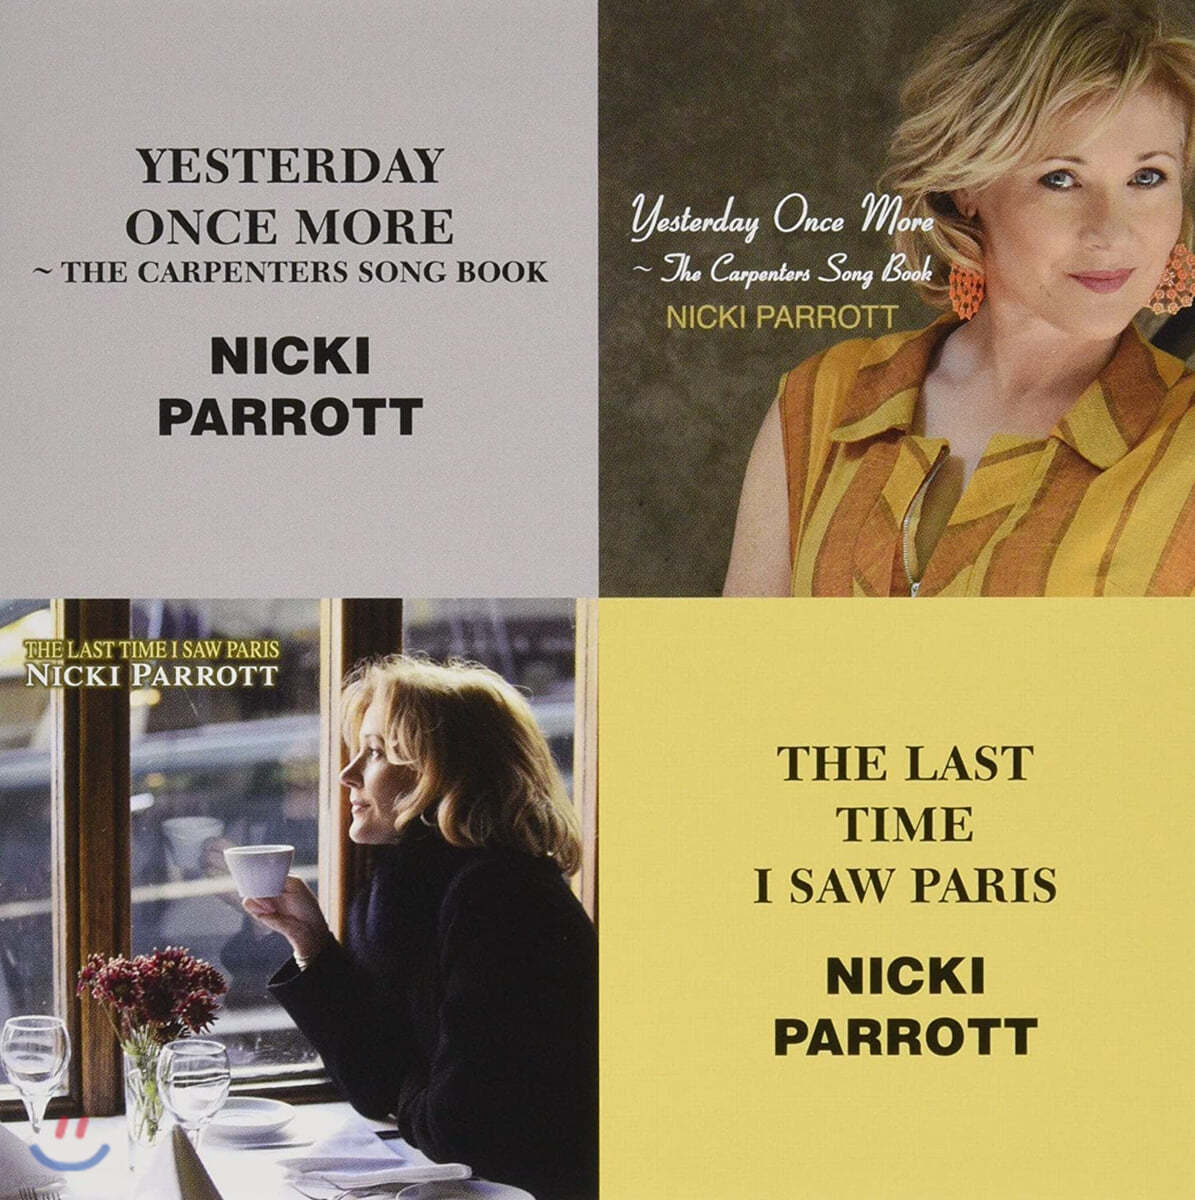 Nicki Parrott (니키 패럿) - Yesterday Once More + The Last Time I Saw Paris